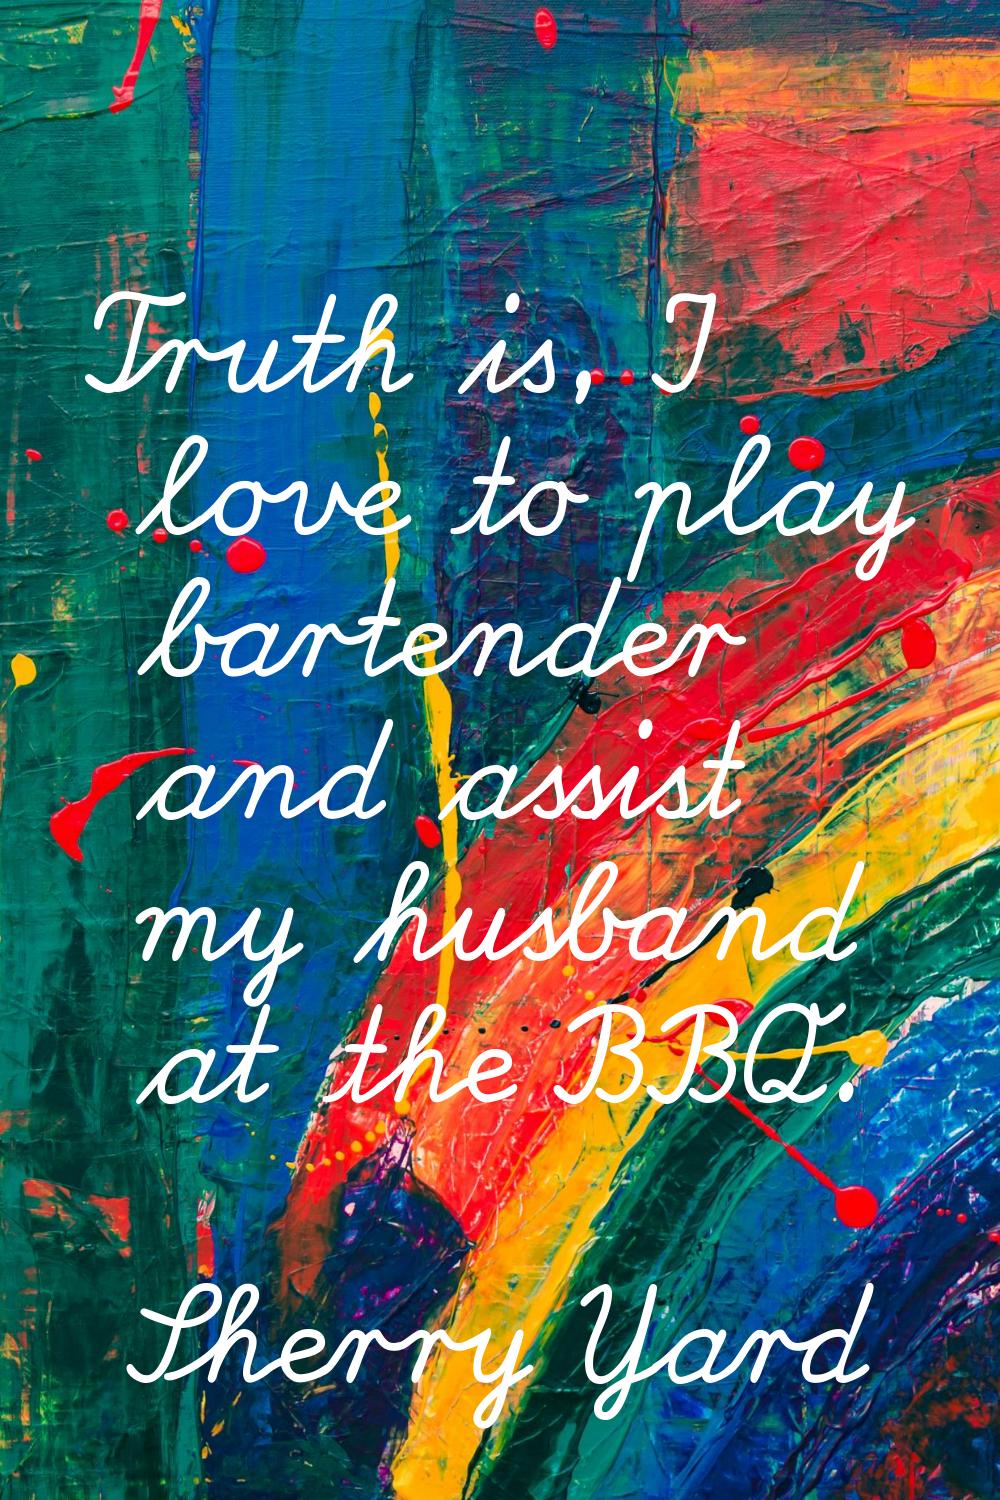 Truth is, I love to play bartender and assist my husband at the BBQ.